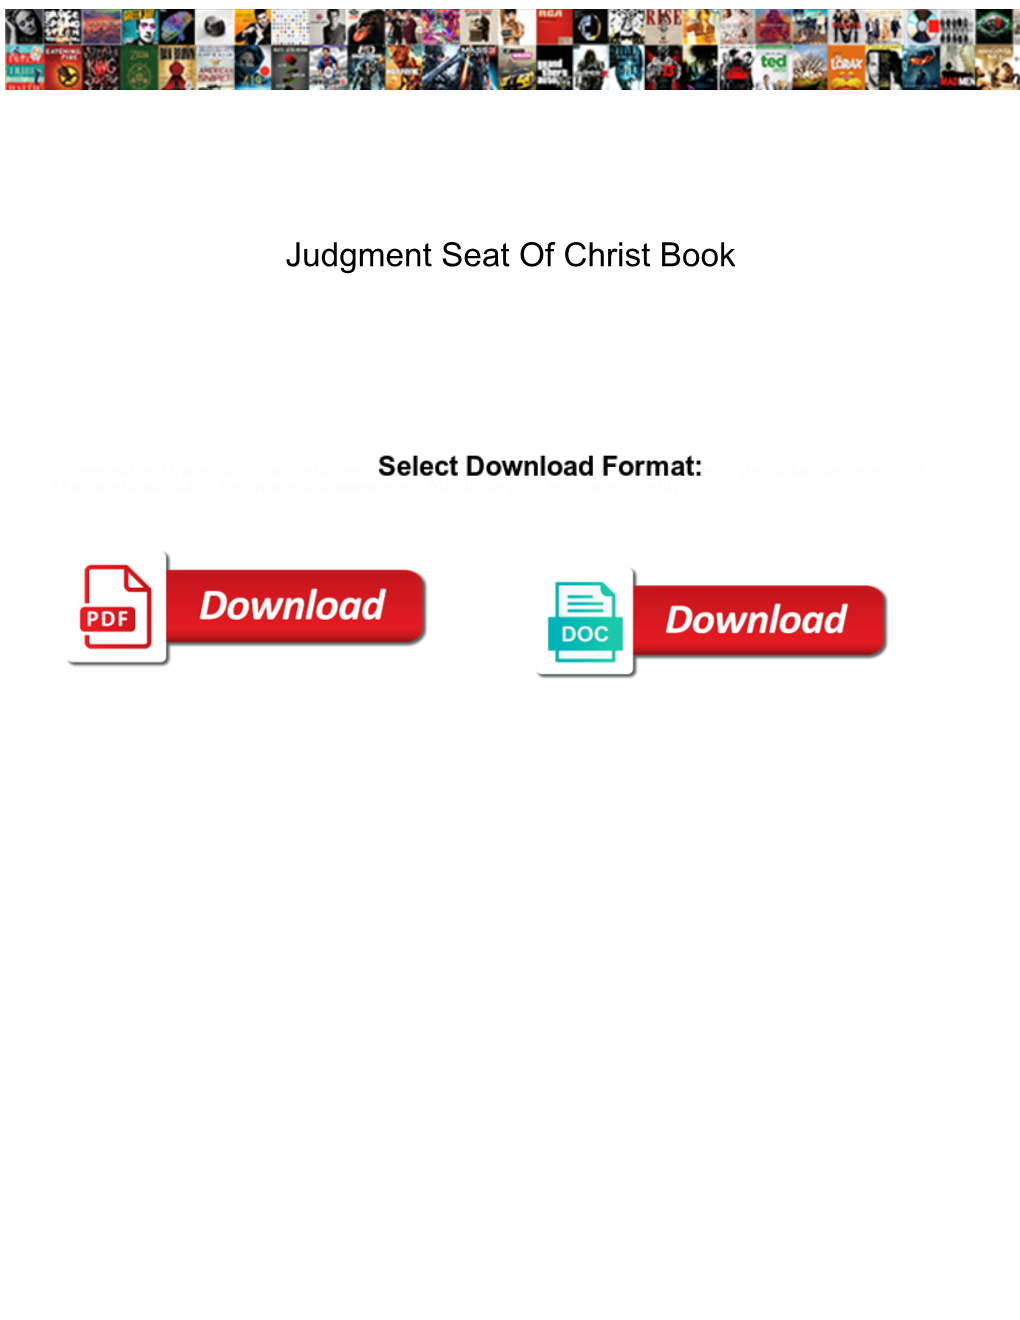 Judgment Seat of Christ Book